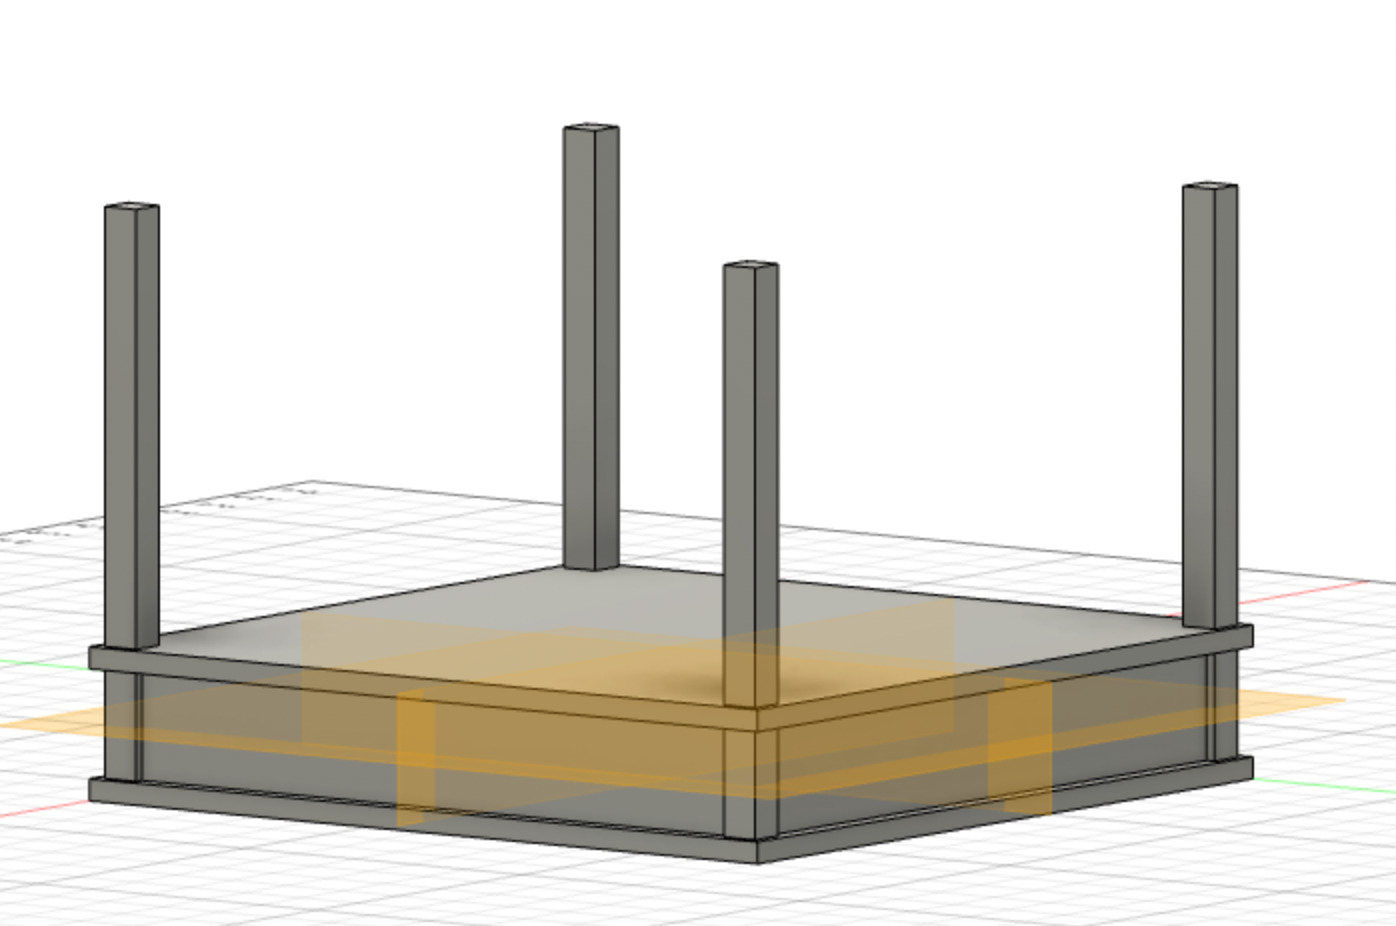 noh stage model screenshot 23 in fusion 360